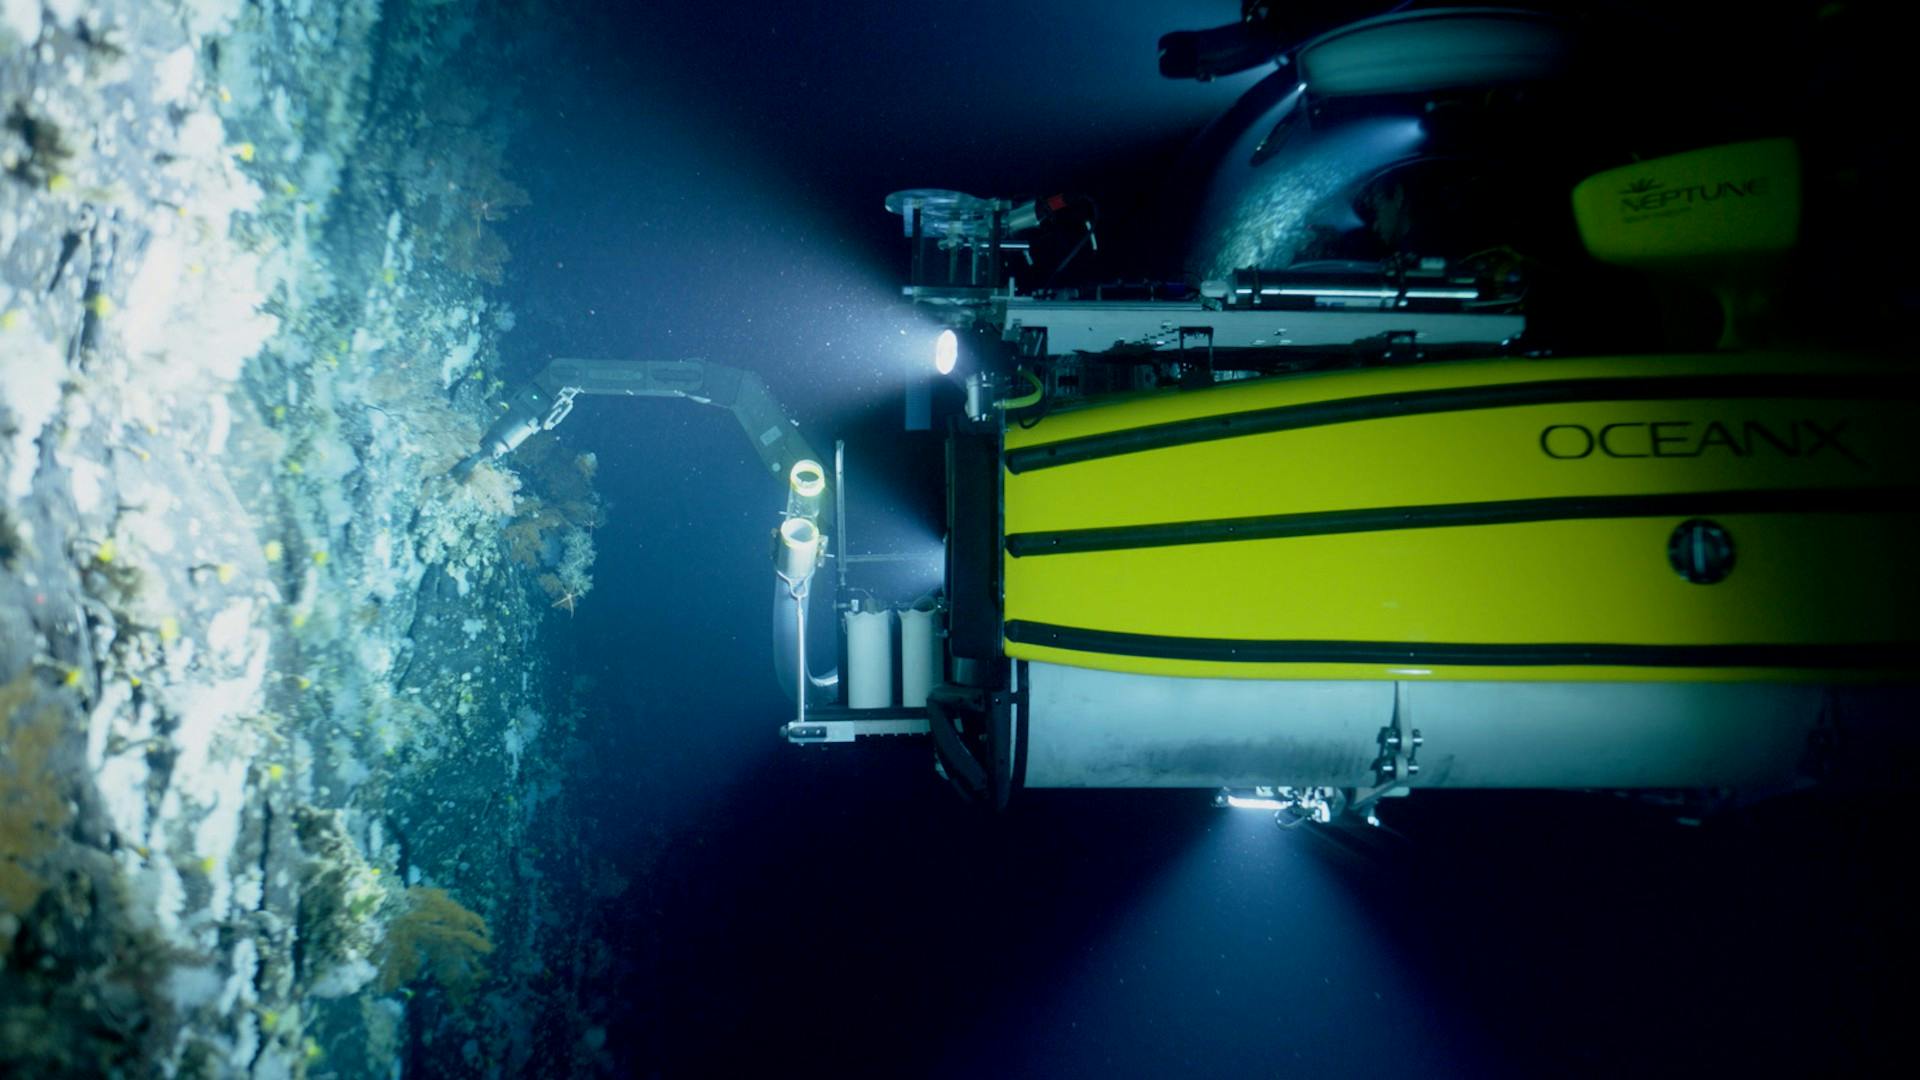 Submersible taking a sample